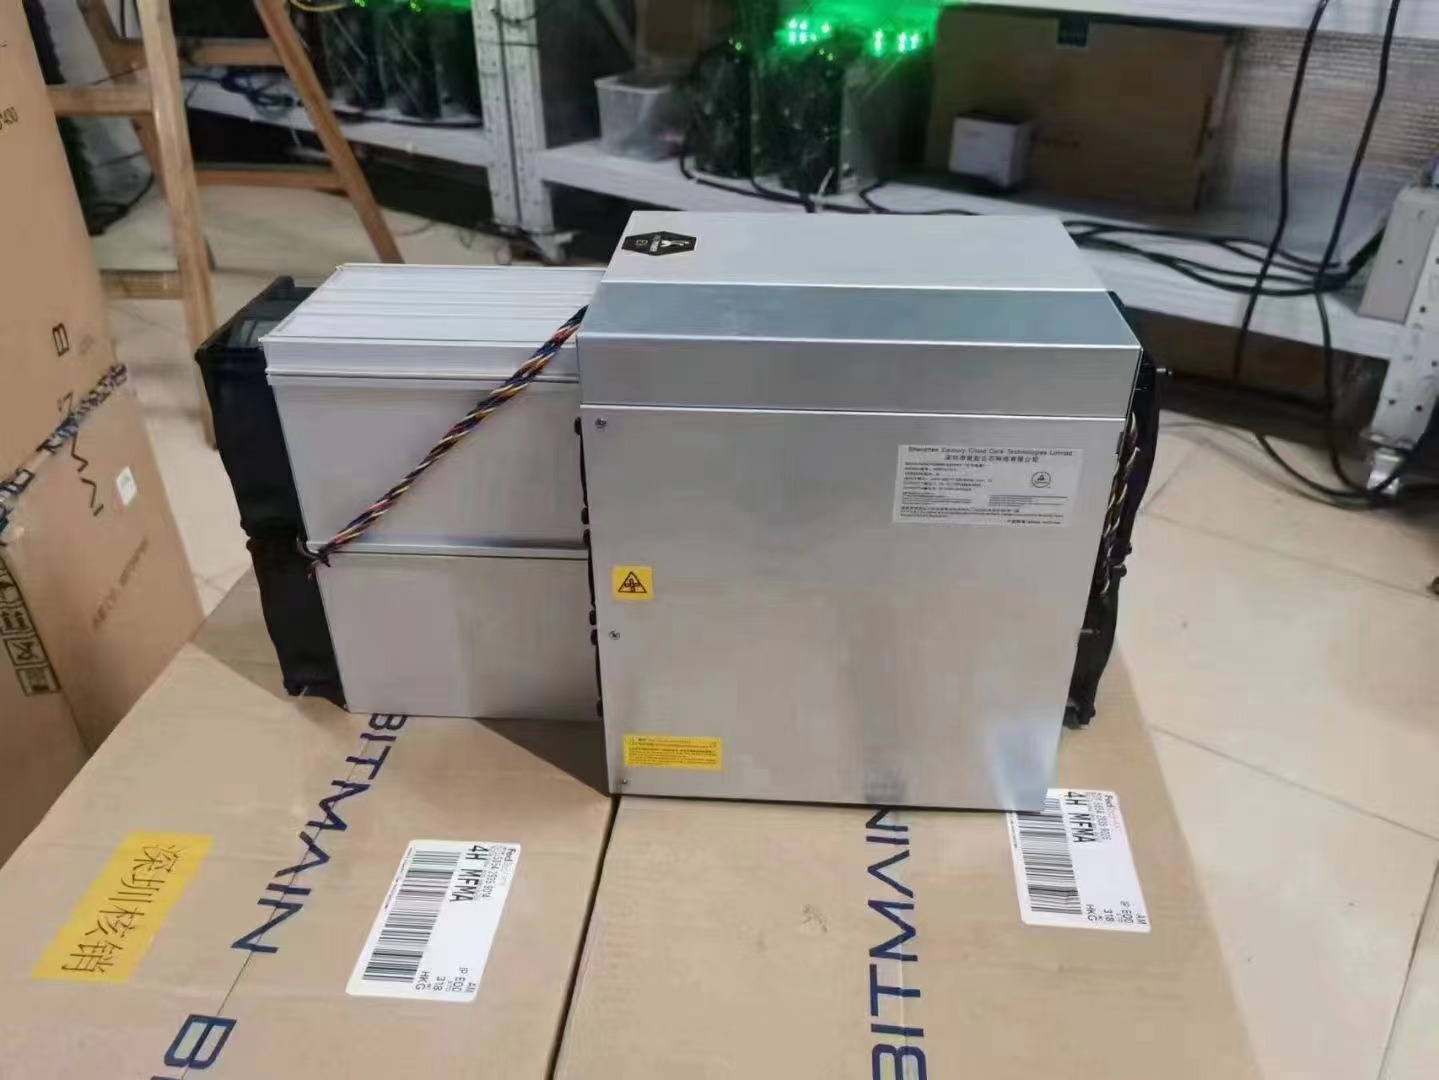 NEW Pre-order Antminer E9 (2.4Gh)  Bitmain mining EtHash algorithm with hashrate 2.4Gh/s with 1920W Power Supply